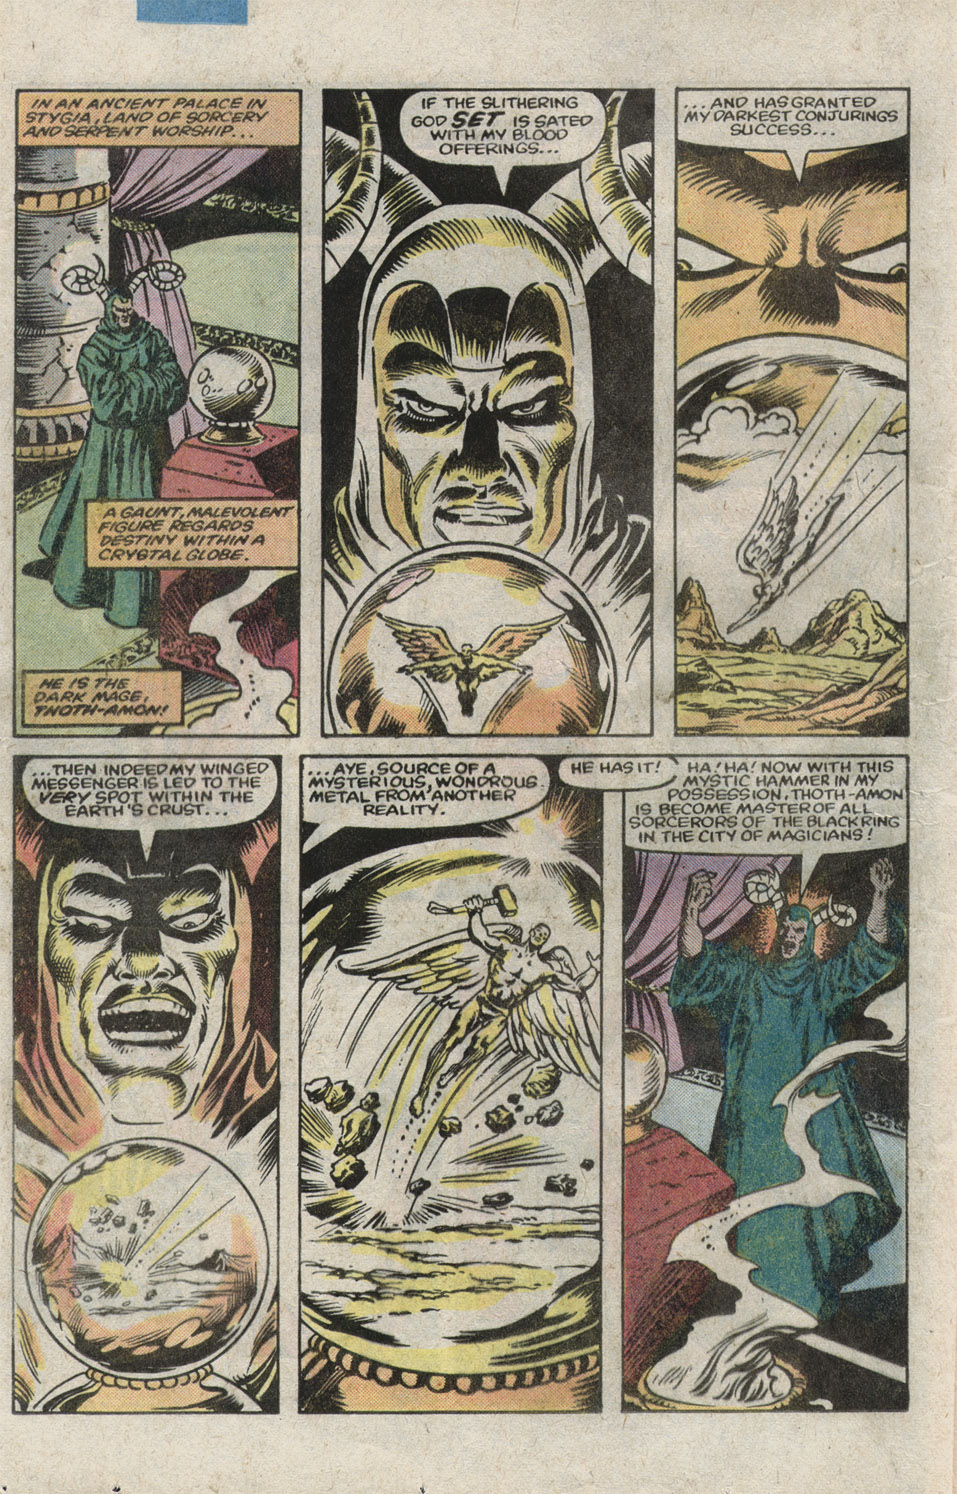 What If? (1977) issue 39 - Thor battled conan - Page 28